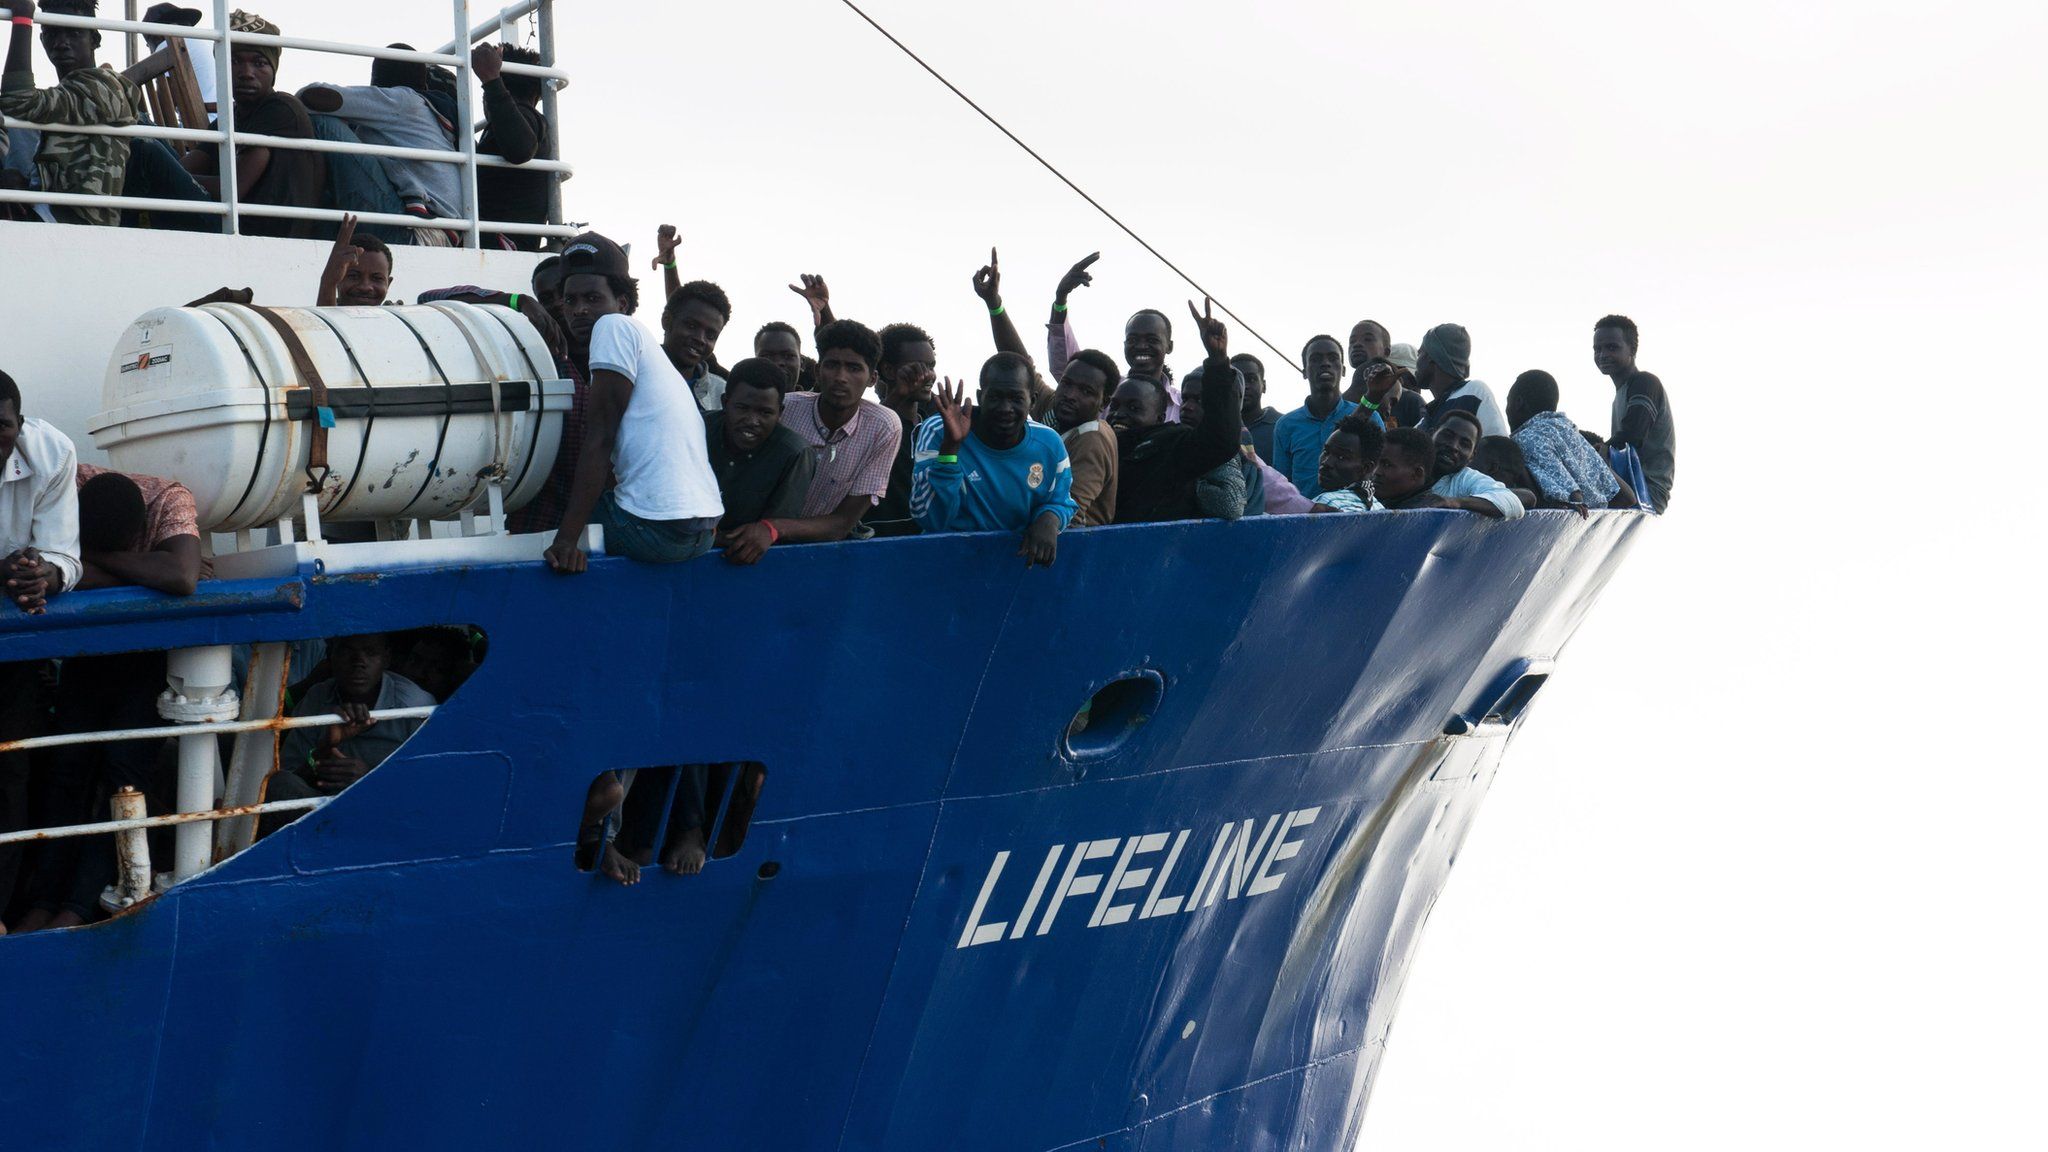 The Lifeline ship carrying migrants in the Mediterranean